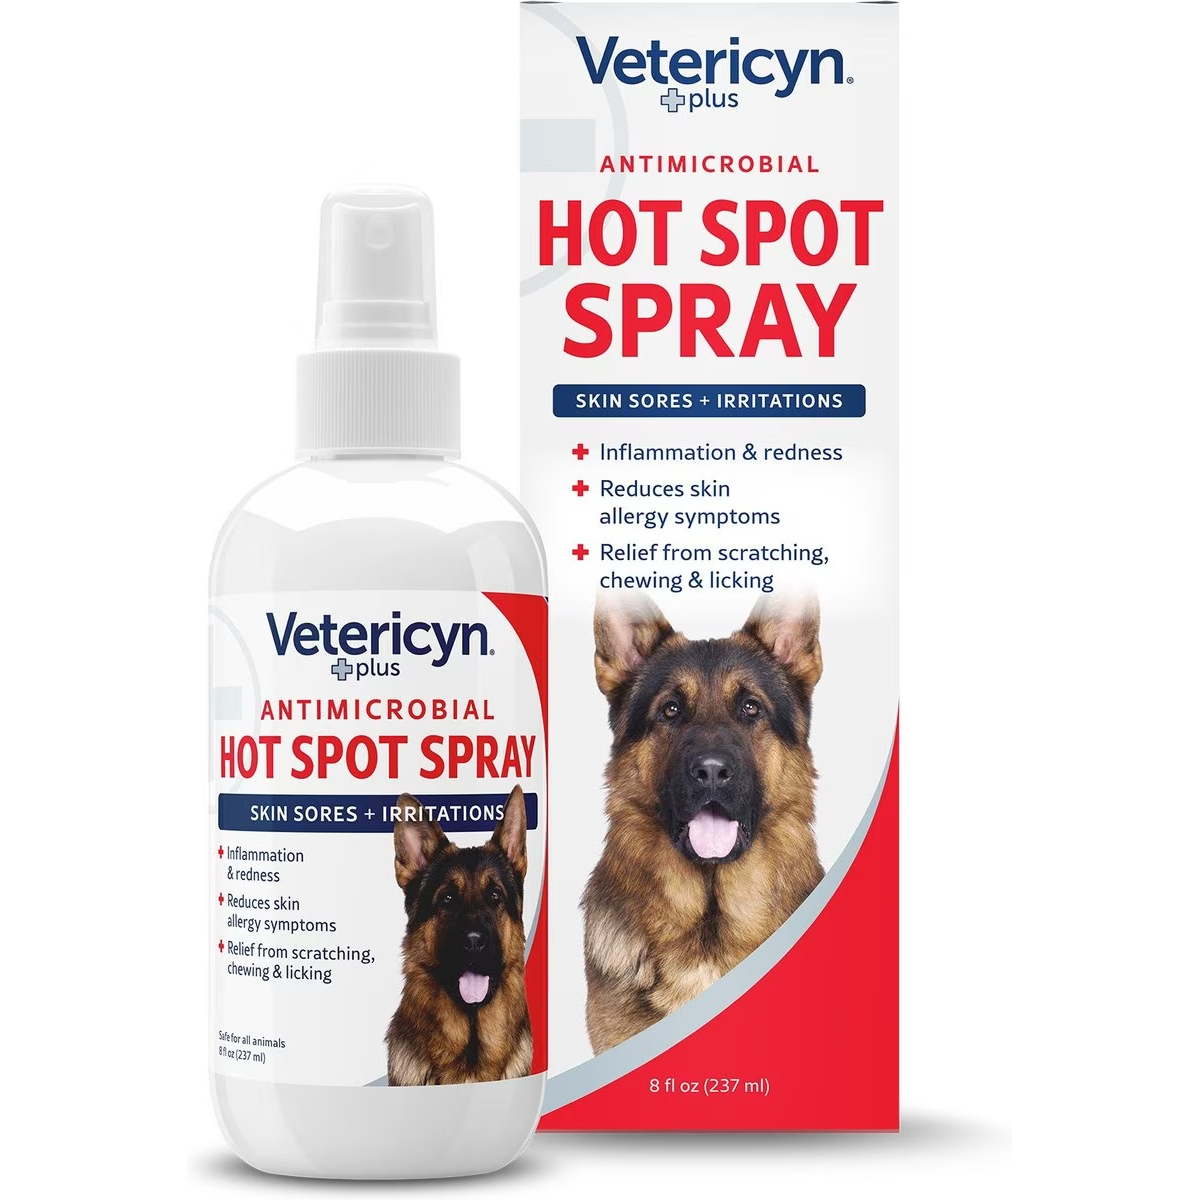 Vetericyn Plus Antimicrobial Hot Spot Spray for Dogs